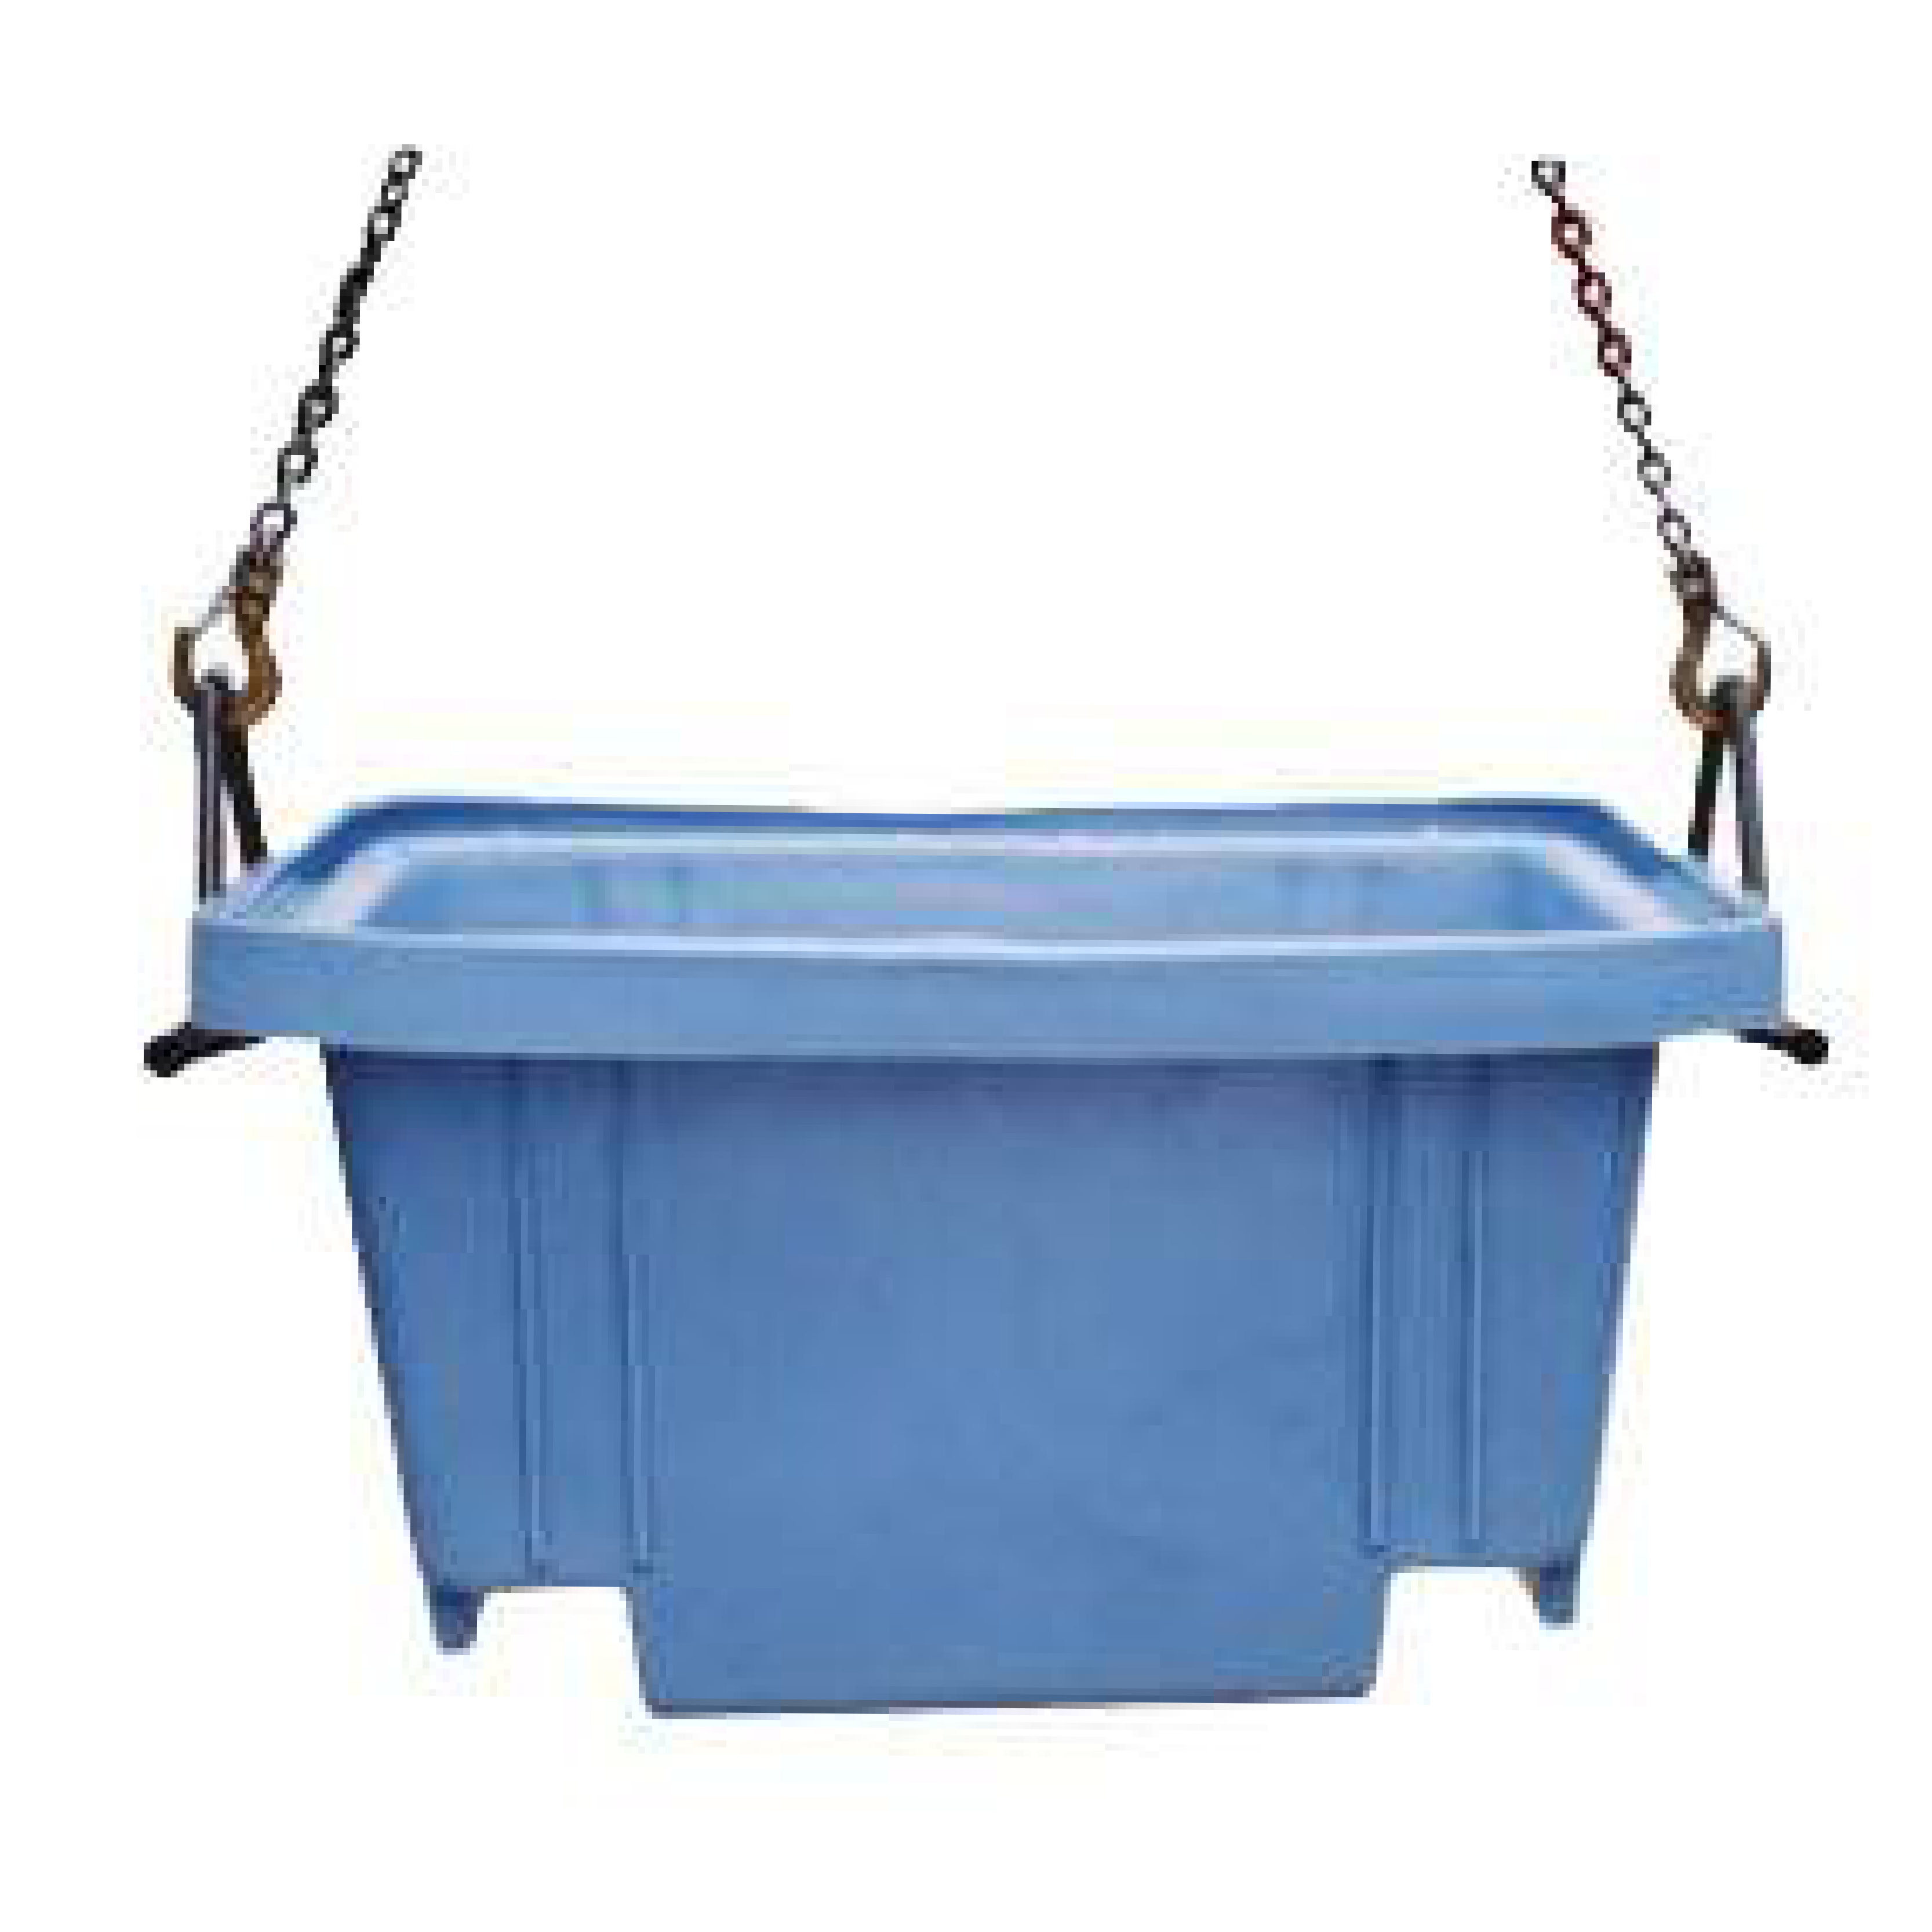 250 Litre Constructo™ Universal Mortar Tubs for Crane Or Fork Lifting